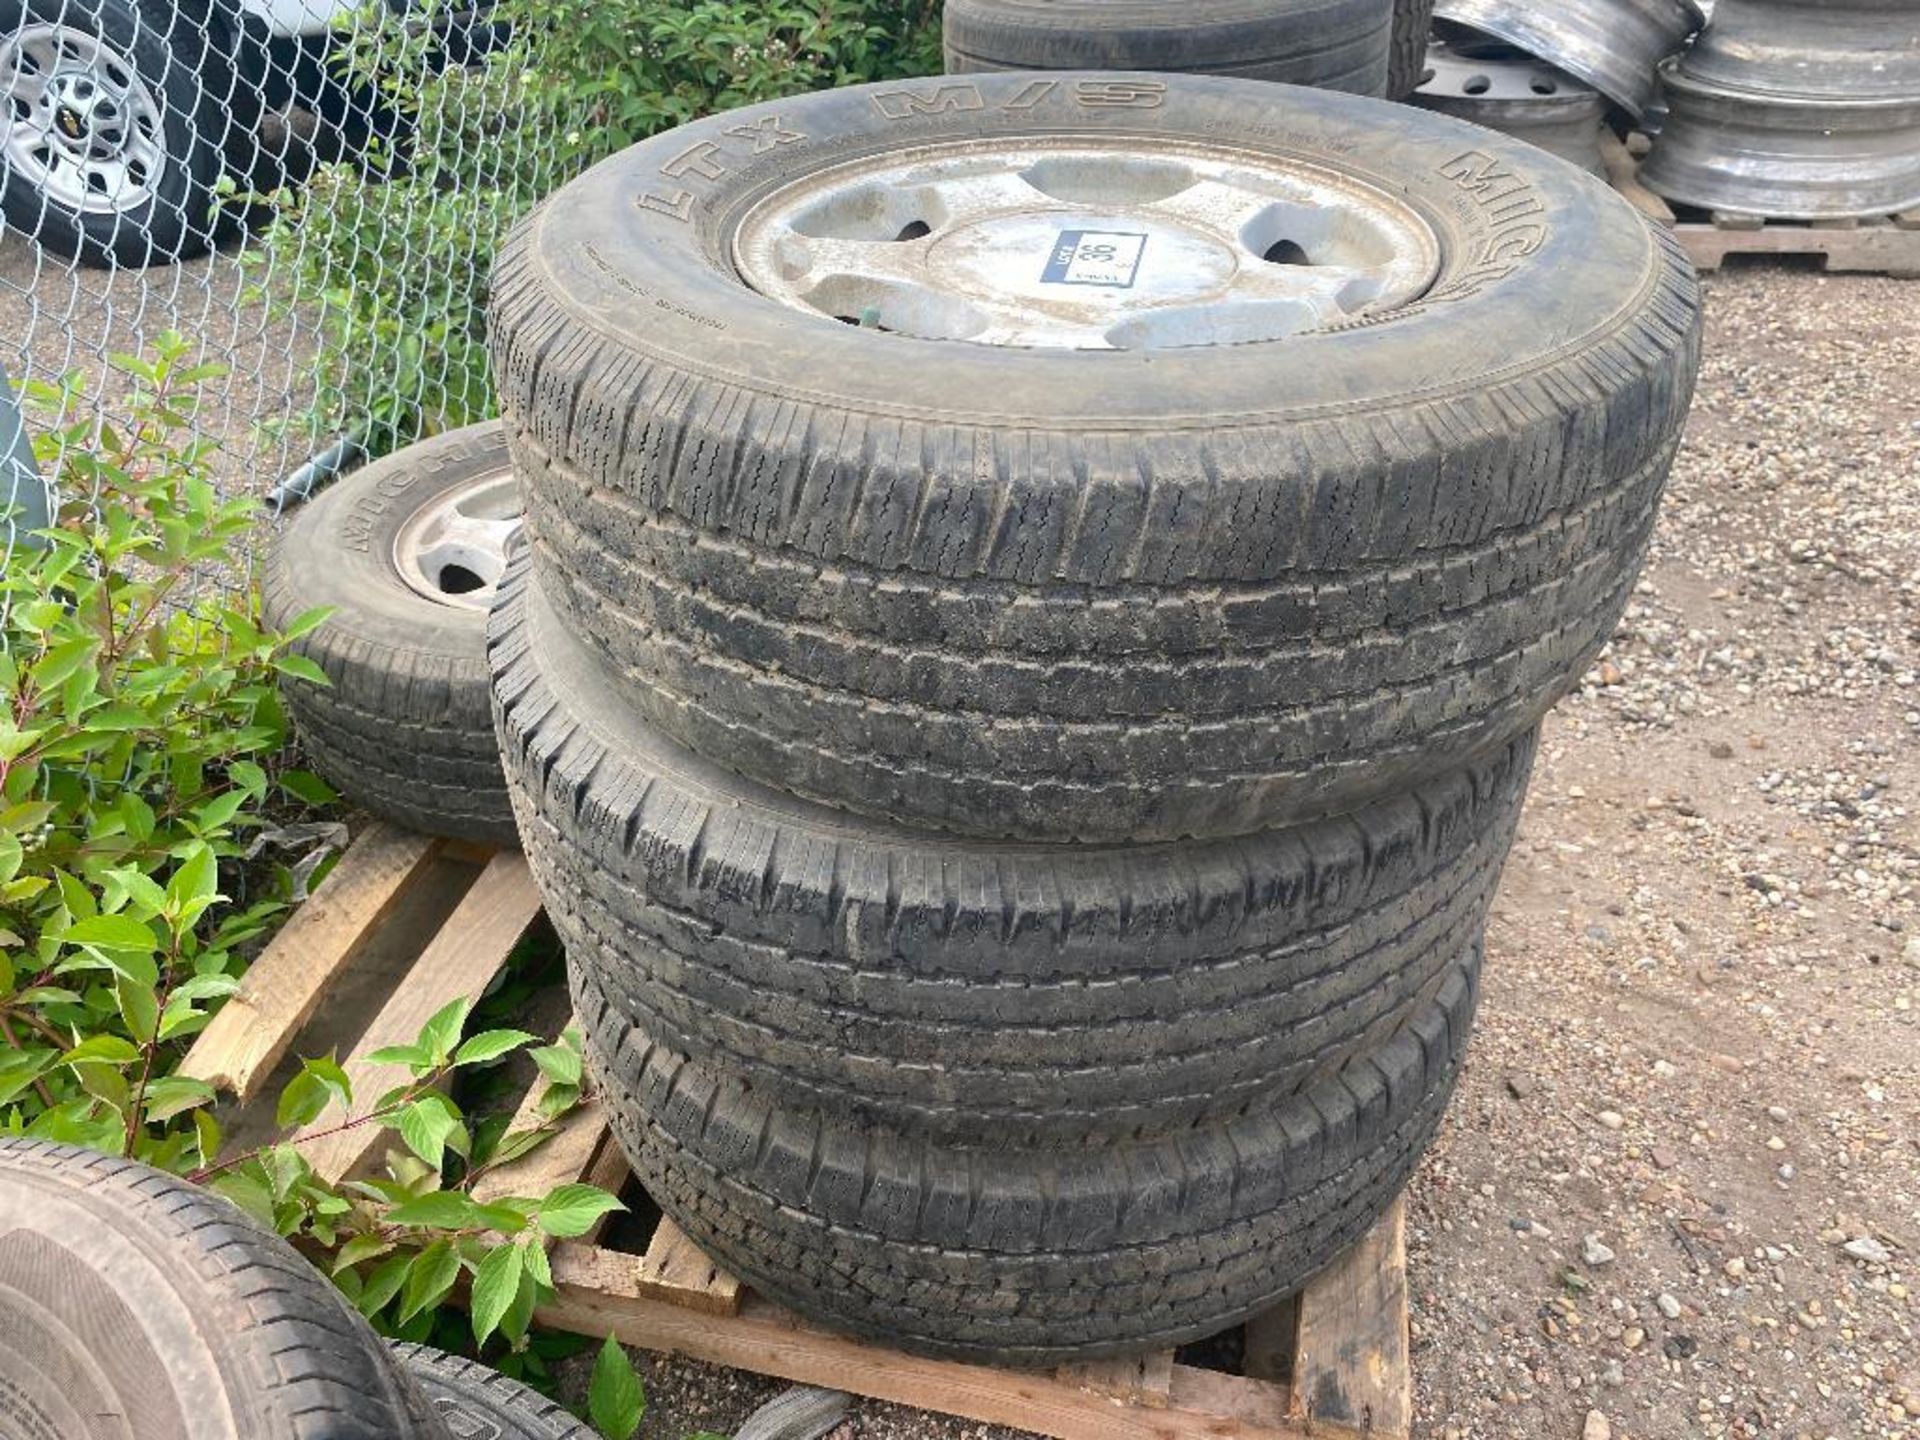 Lot of (4) P255/70R16 Tires - Image 4 of 4